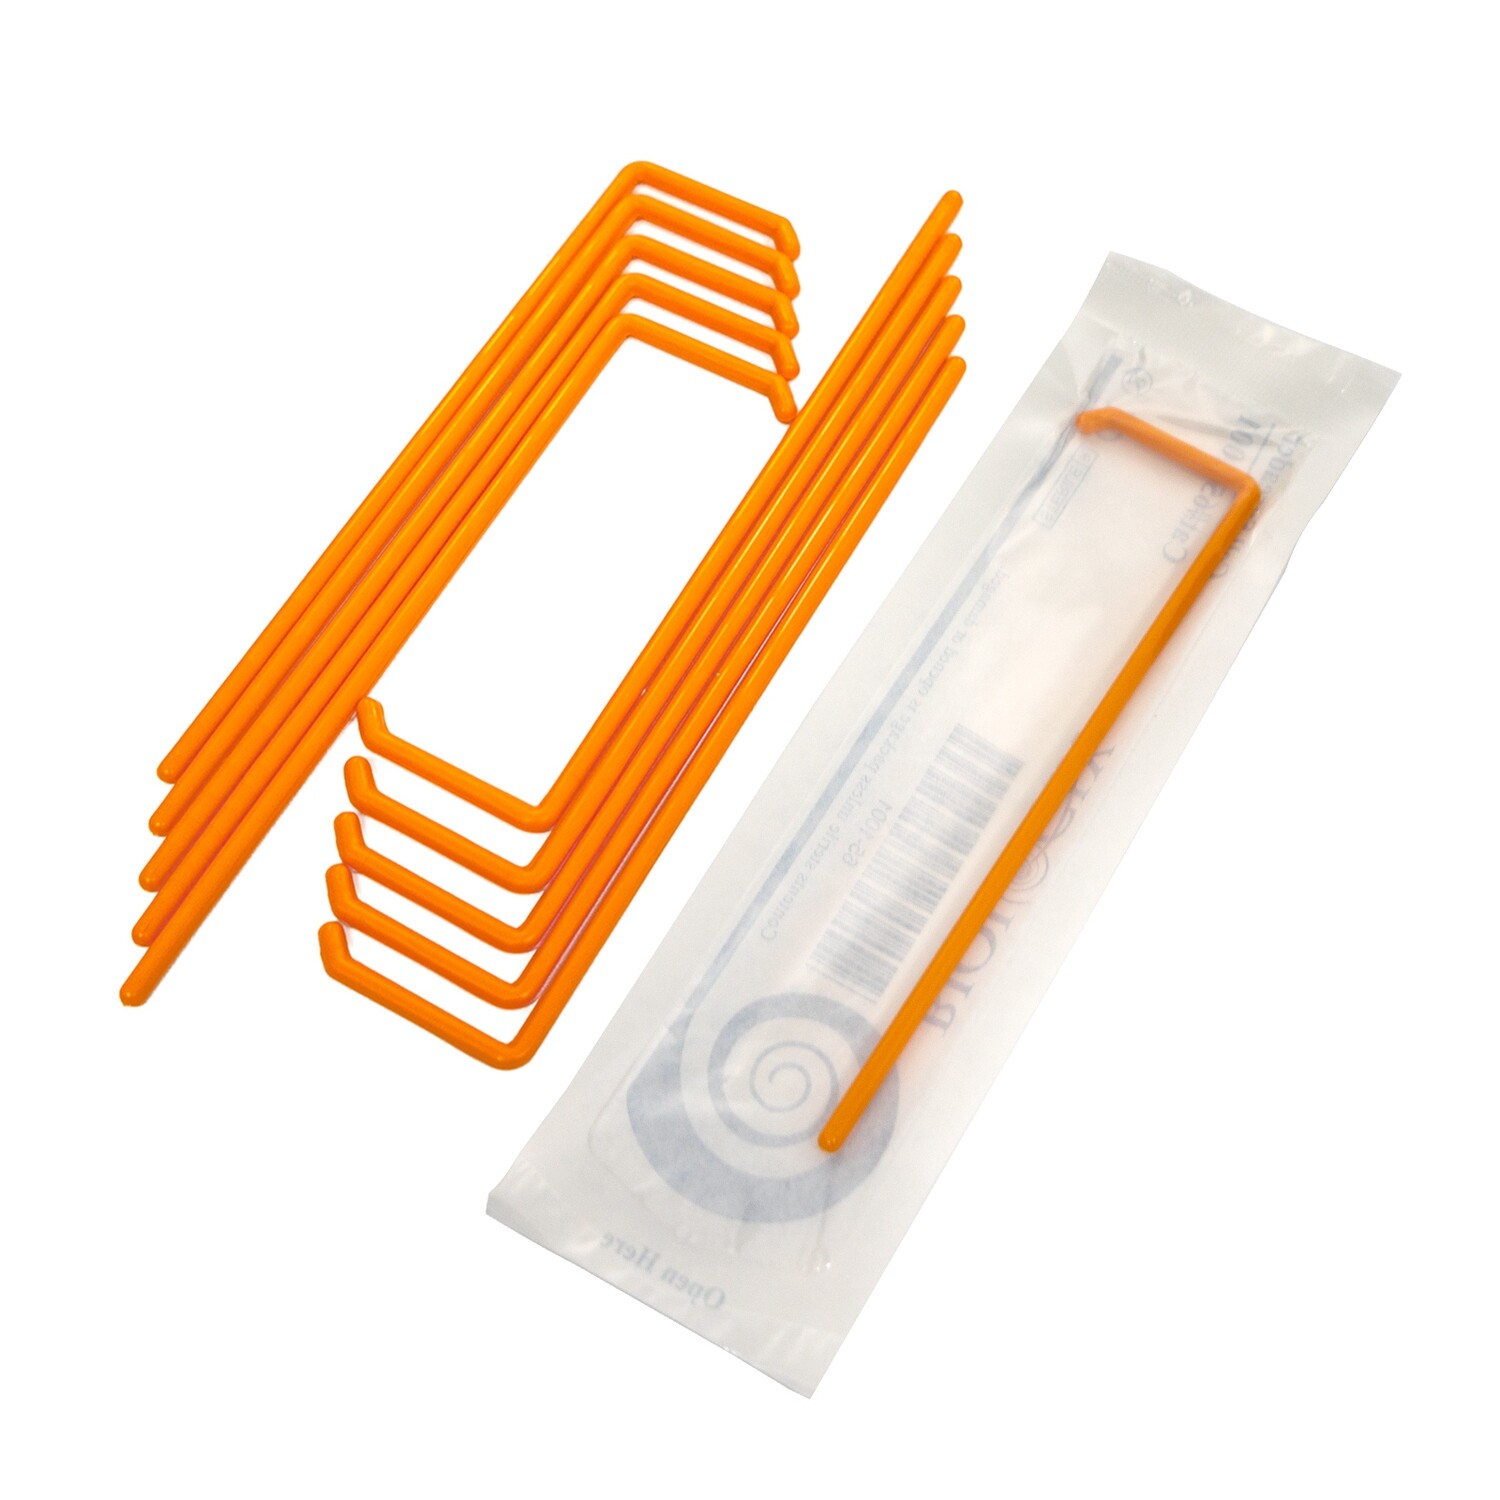 Biologix Cell Spreaders, Orange, Sterile, individually wrapped, Case of 500